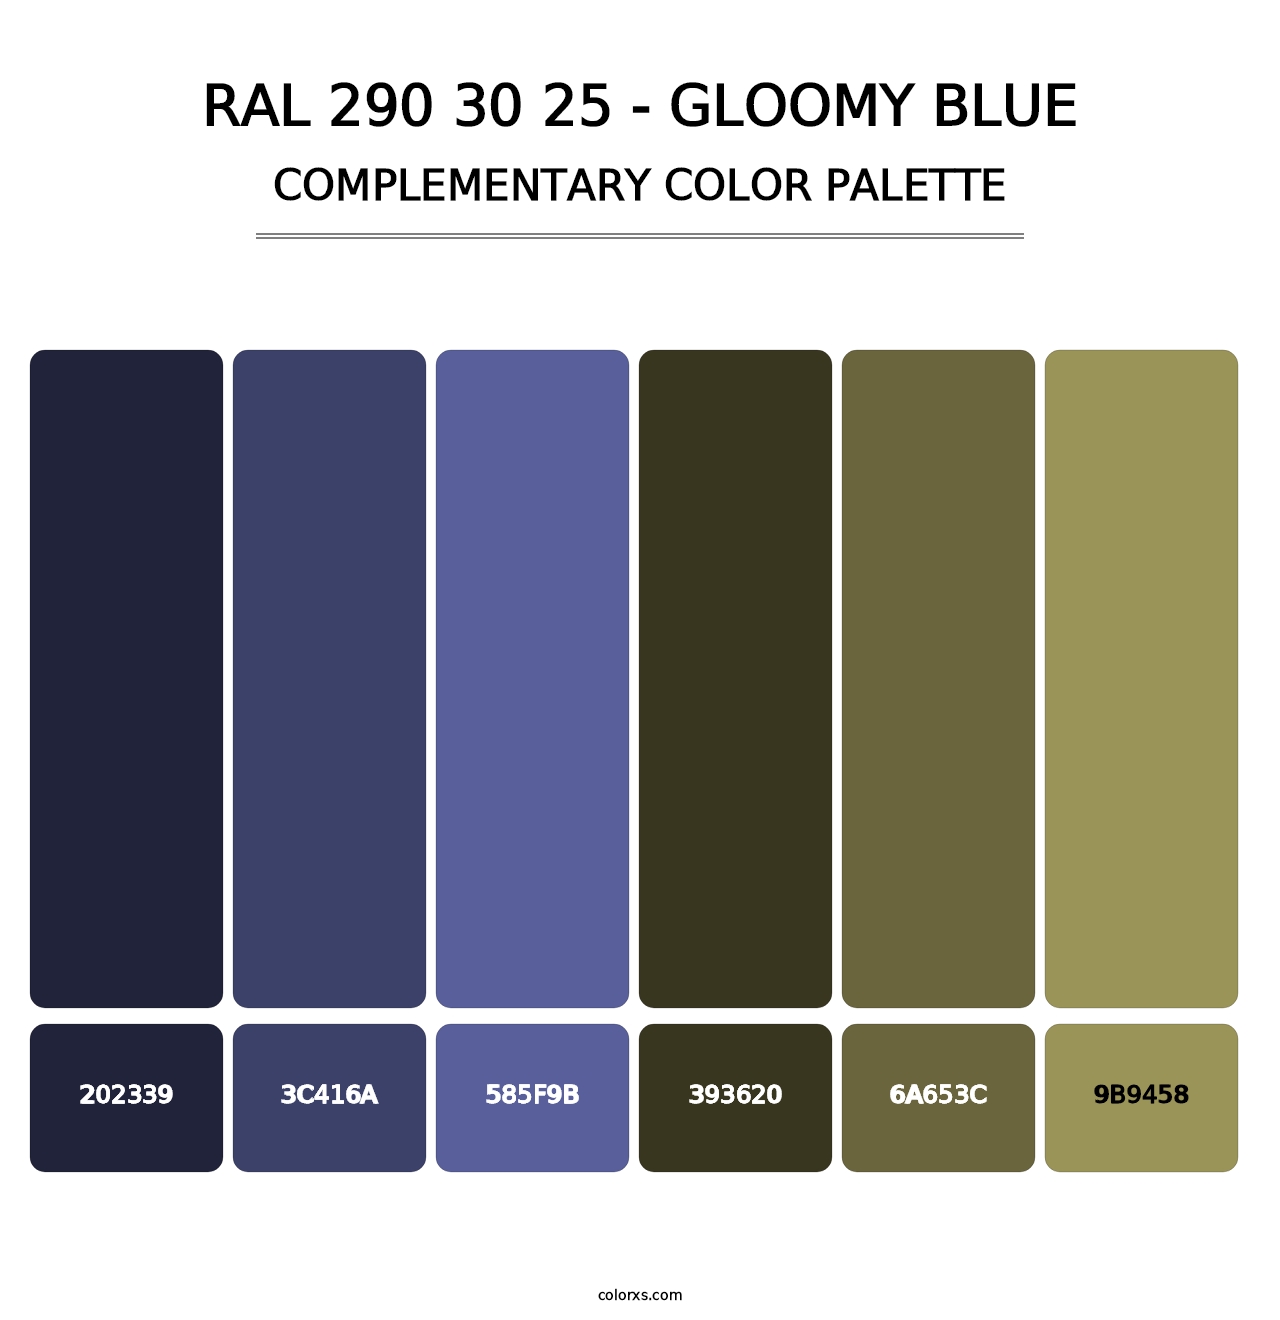 RAL 290 30 25 - Gloomy Blue - Complementary Color Palette